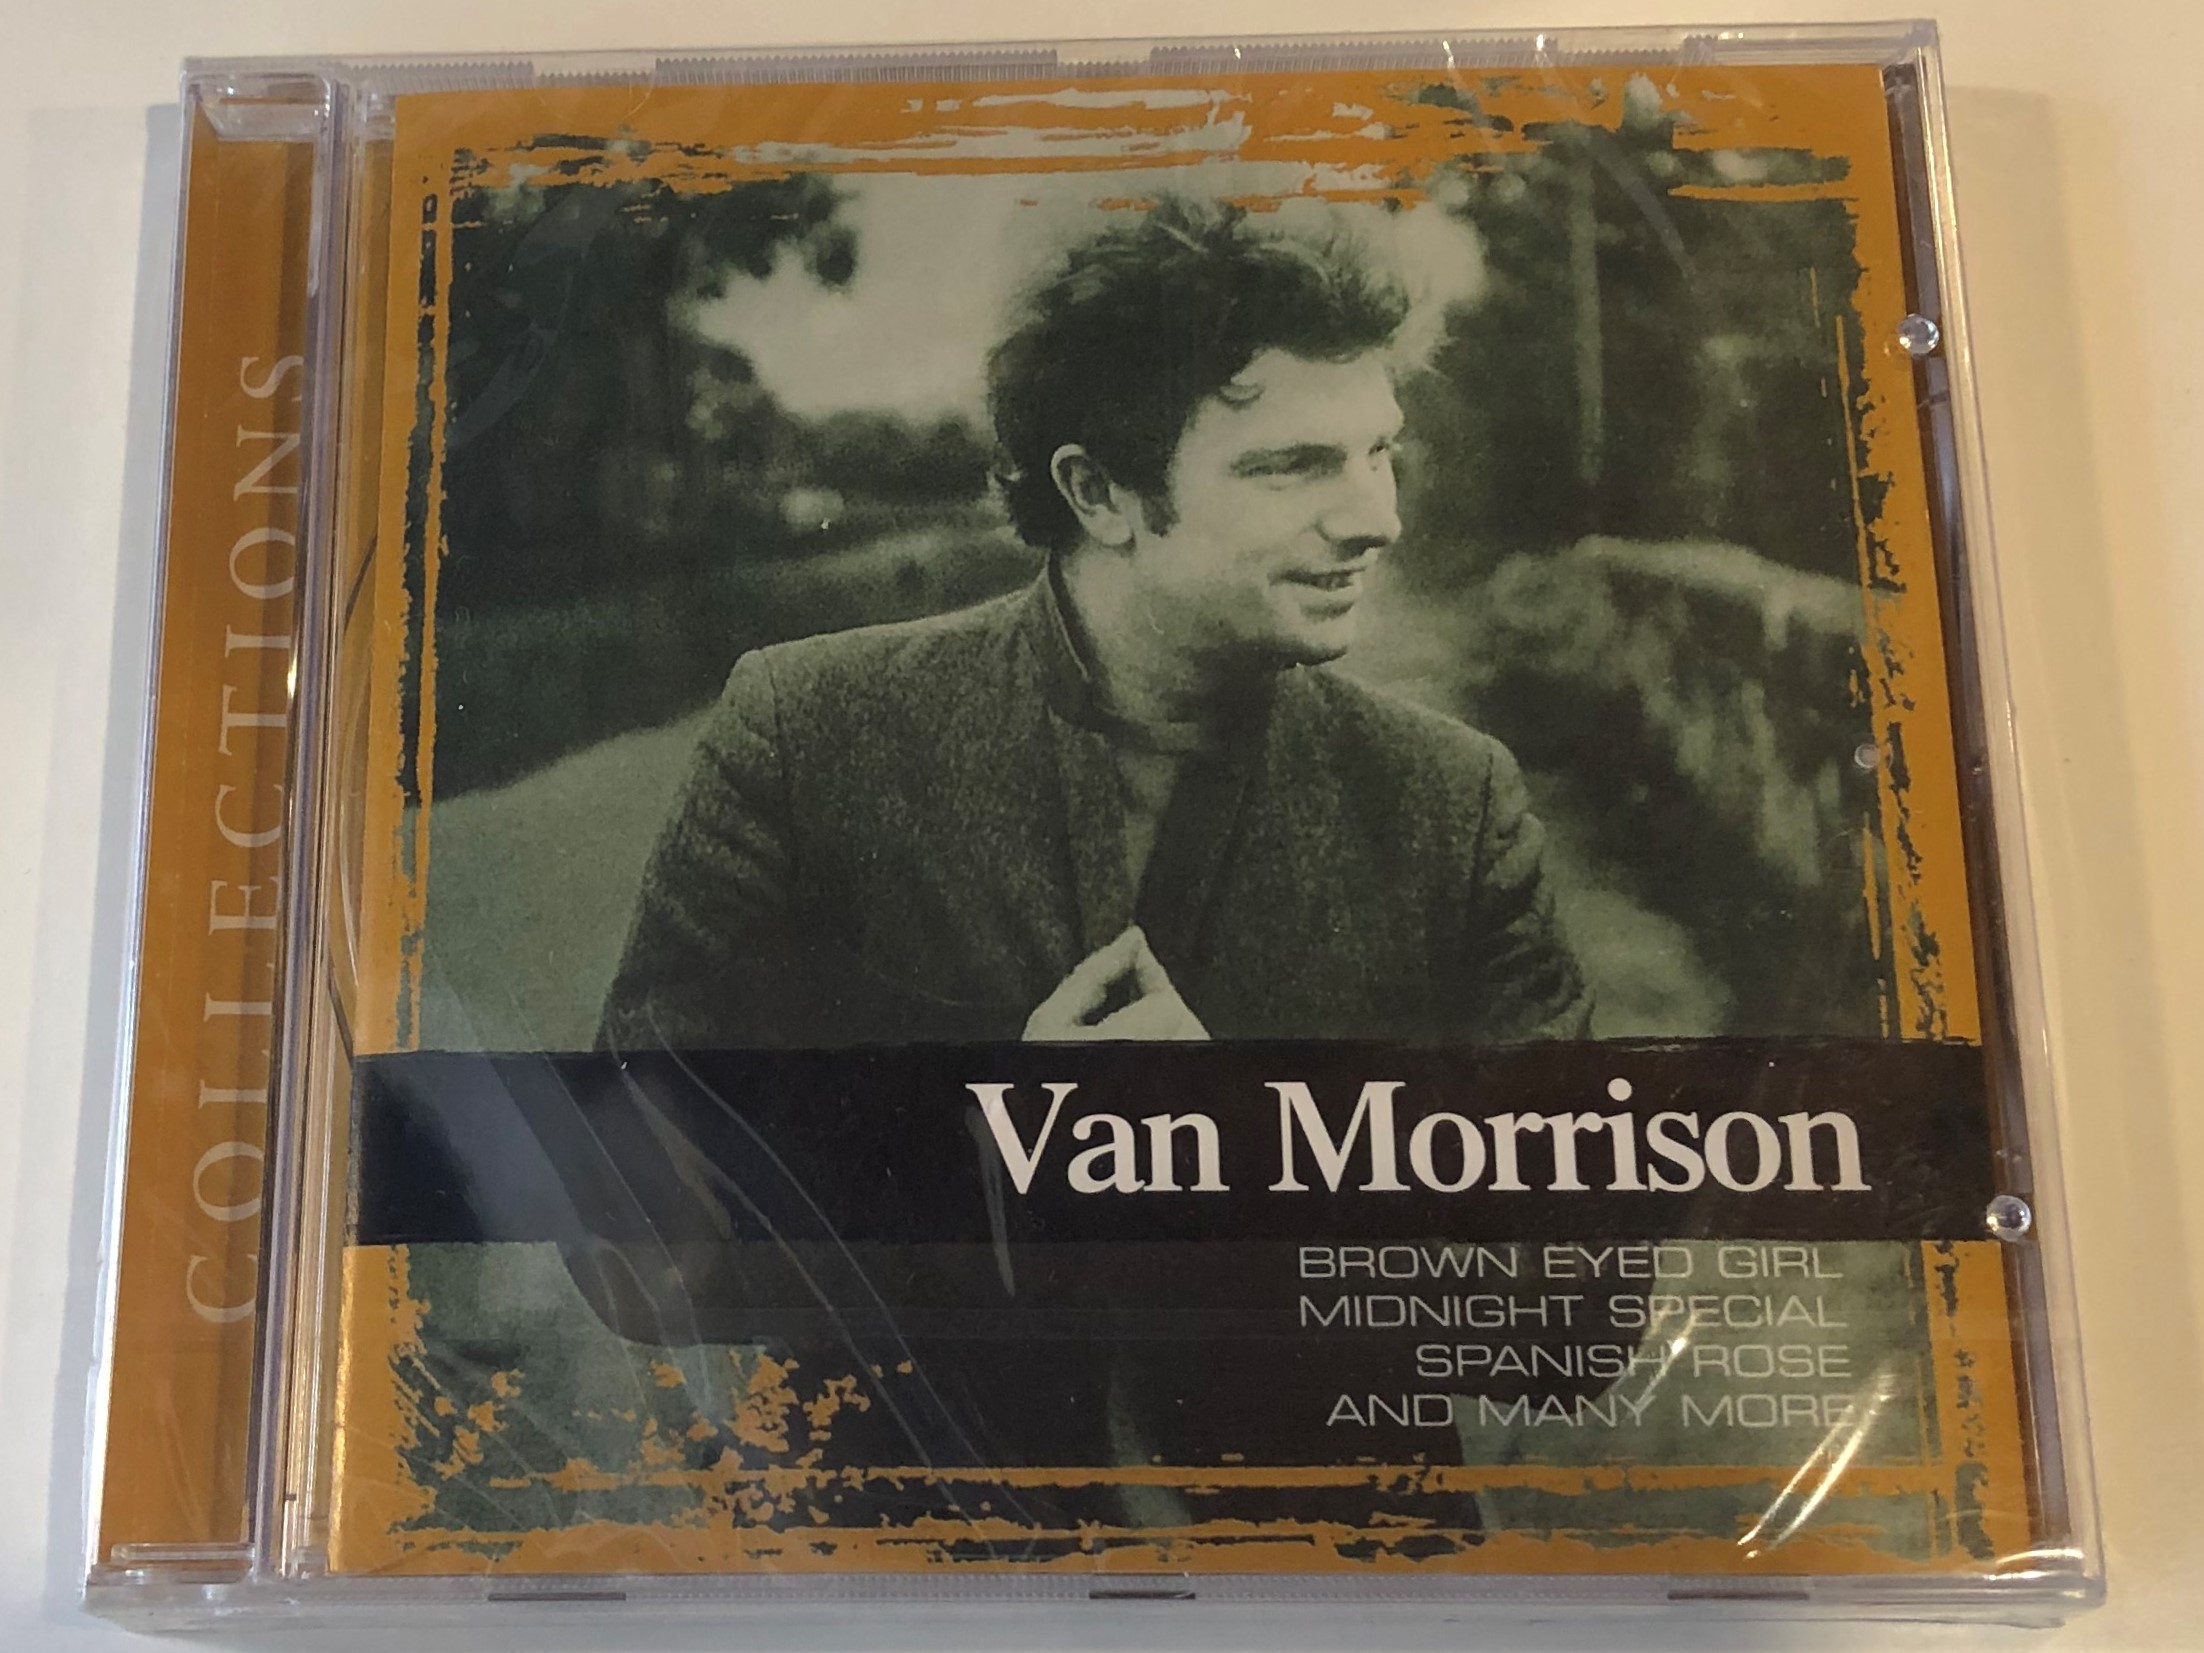 van-morrison-collections-brown-eyed-girl-midnight-special-spanish-rose-and-many-more-sony-bmg-music-entertainment-audio-cd-2005-82876781832-1-.jpg